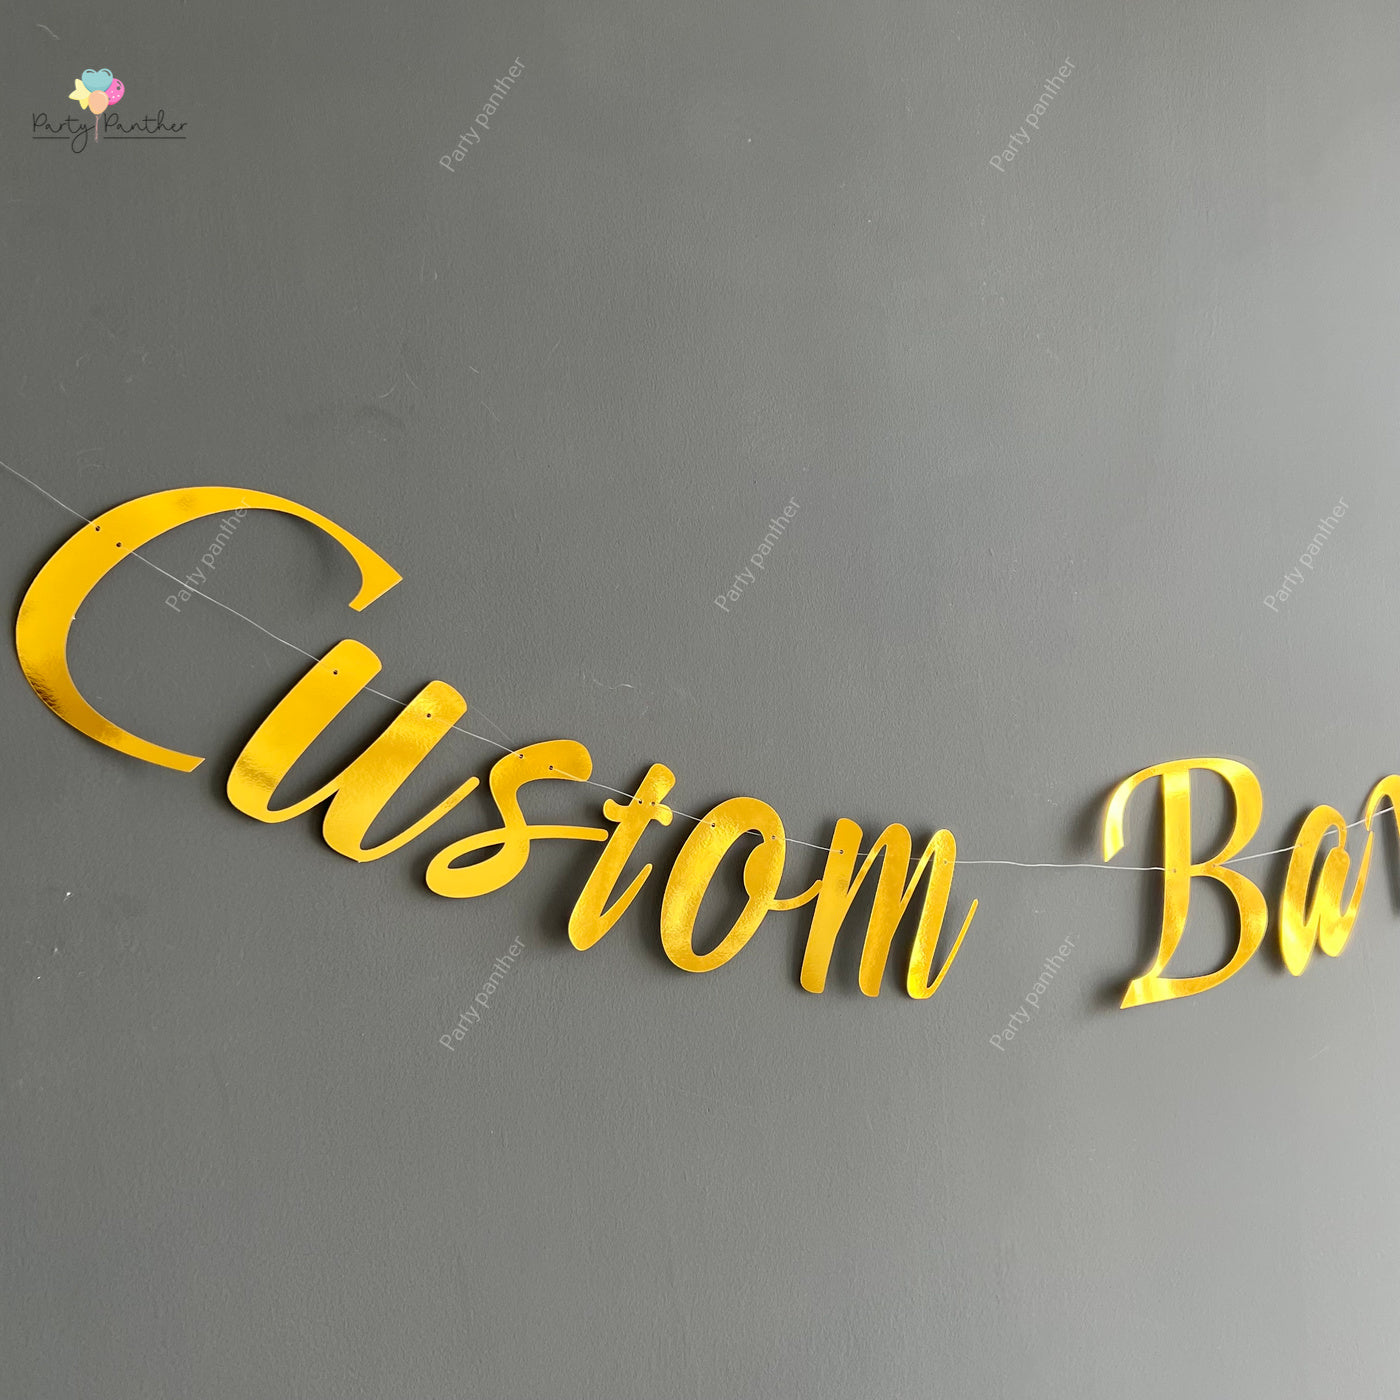 Customized Cursive Metallic Gold Banner - Personalized Handmade party decorations for all occasions